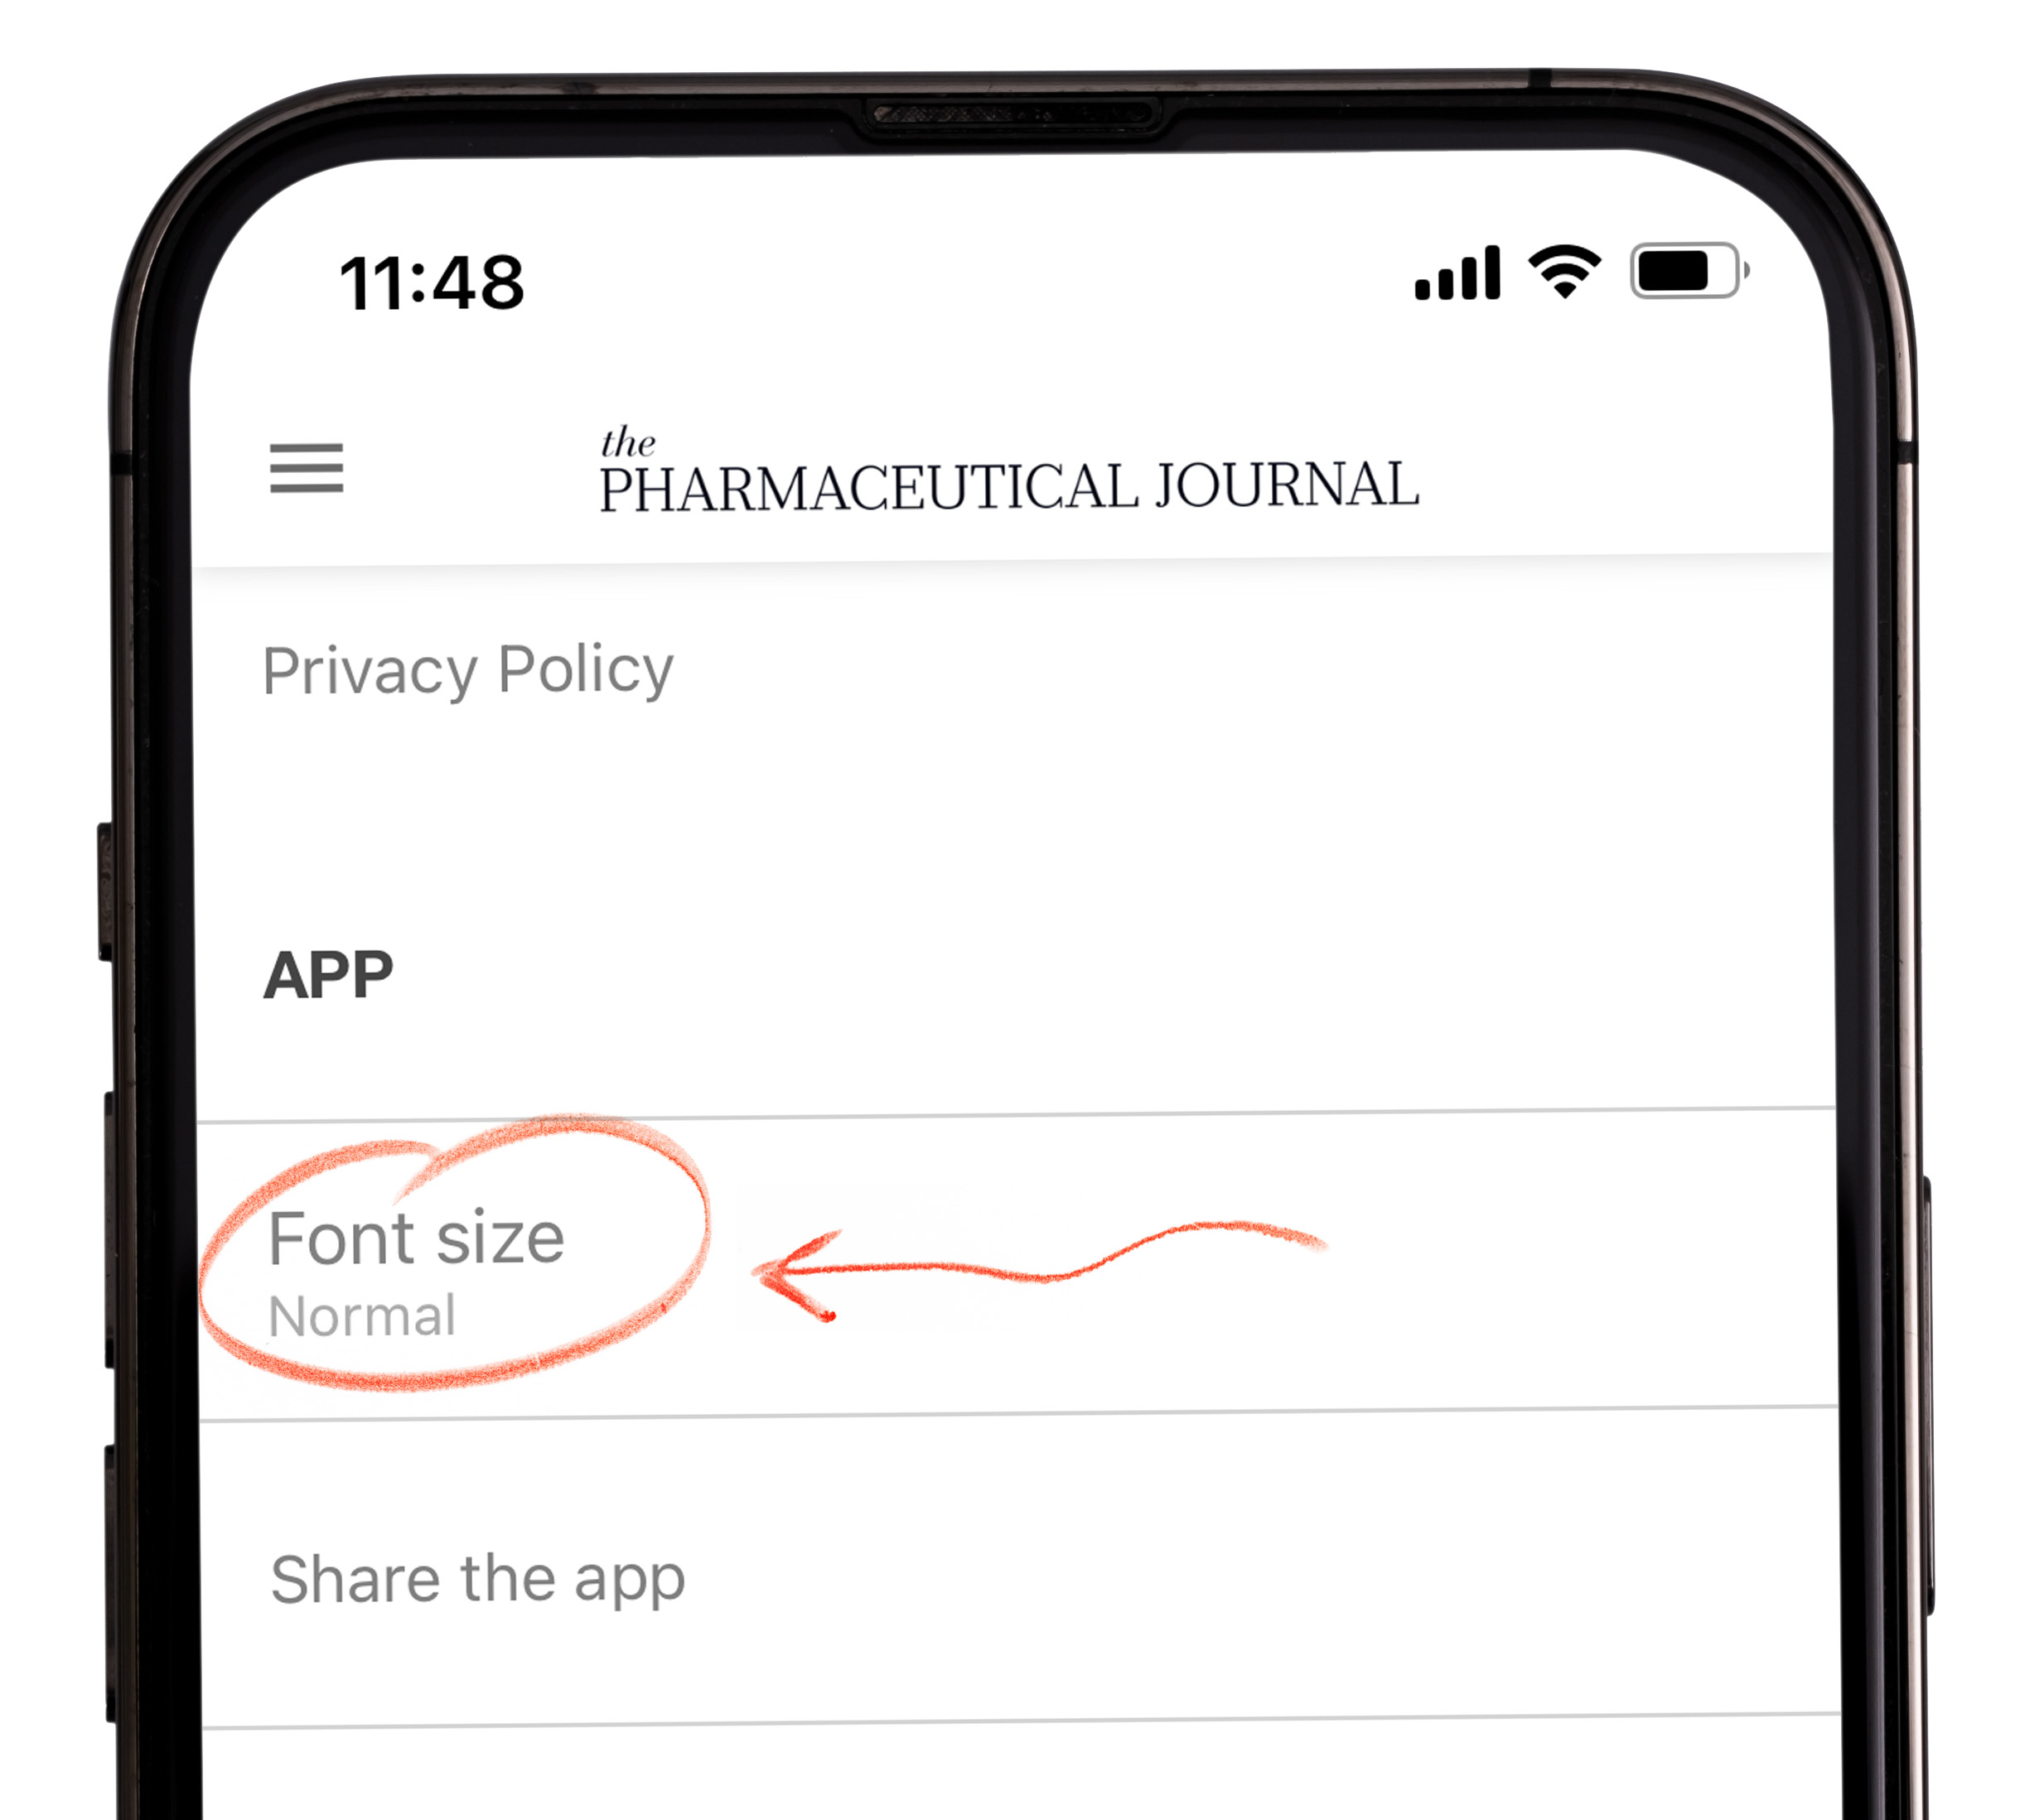 Image of an iphone showing font size in the PJ app